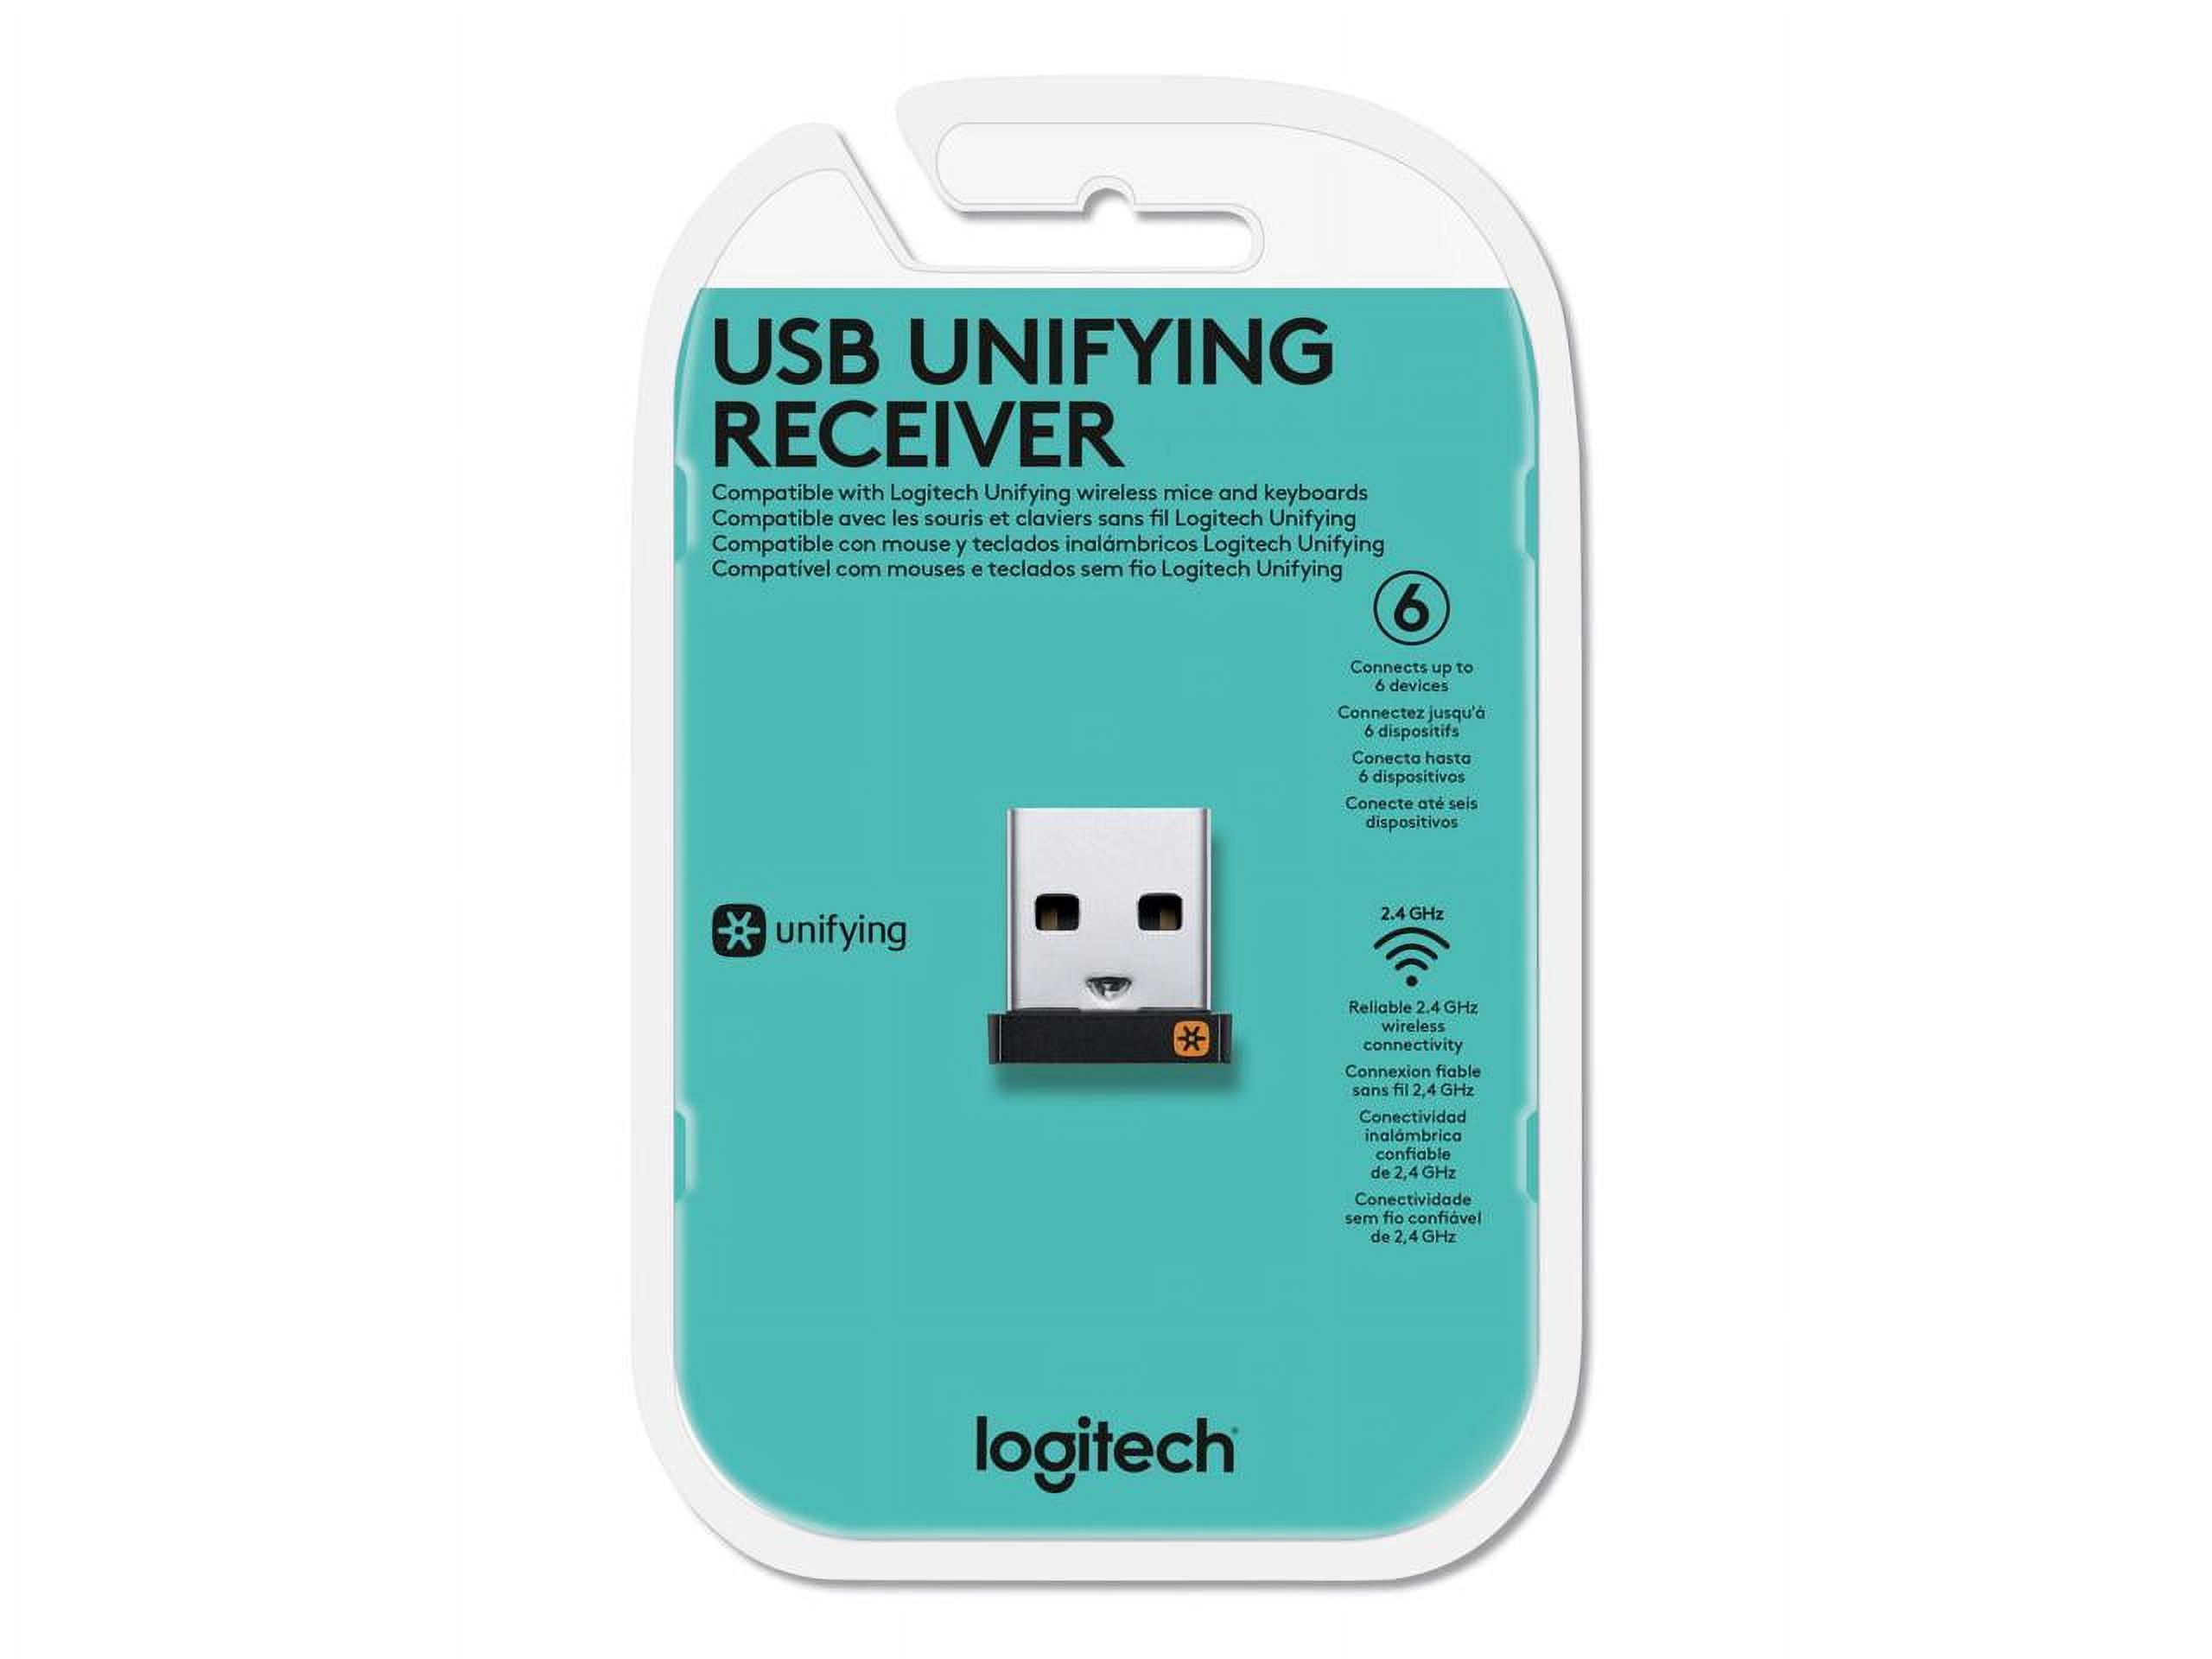 Logitech Wireless Mouse / Keyboard USB Unifying Receiver - image 5 of 20